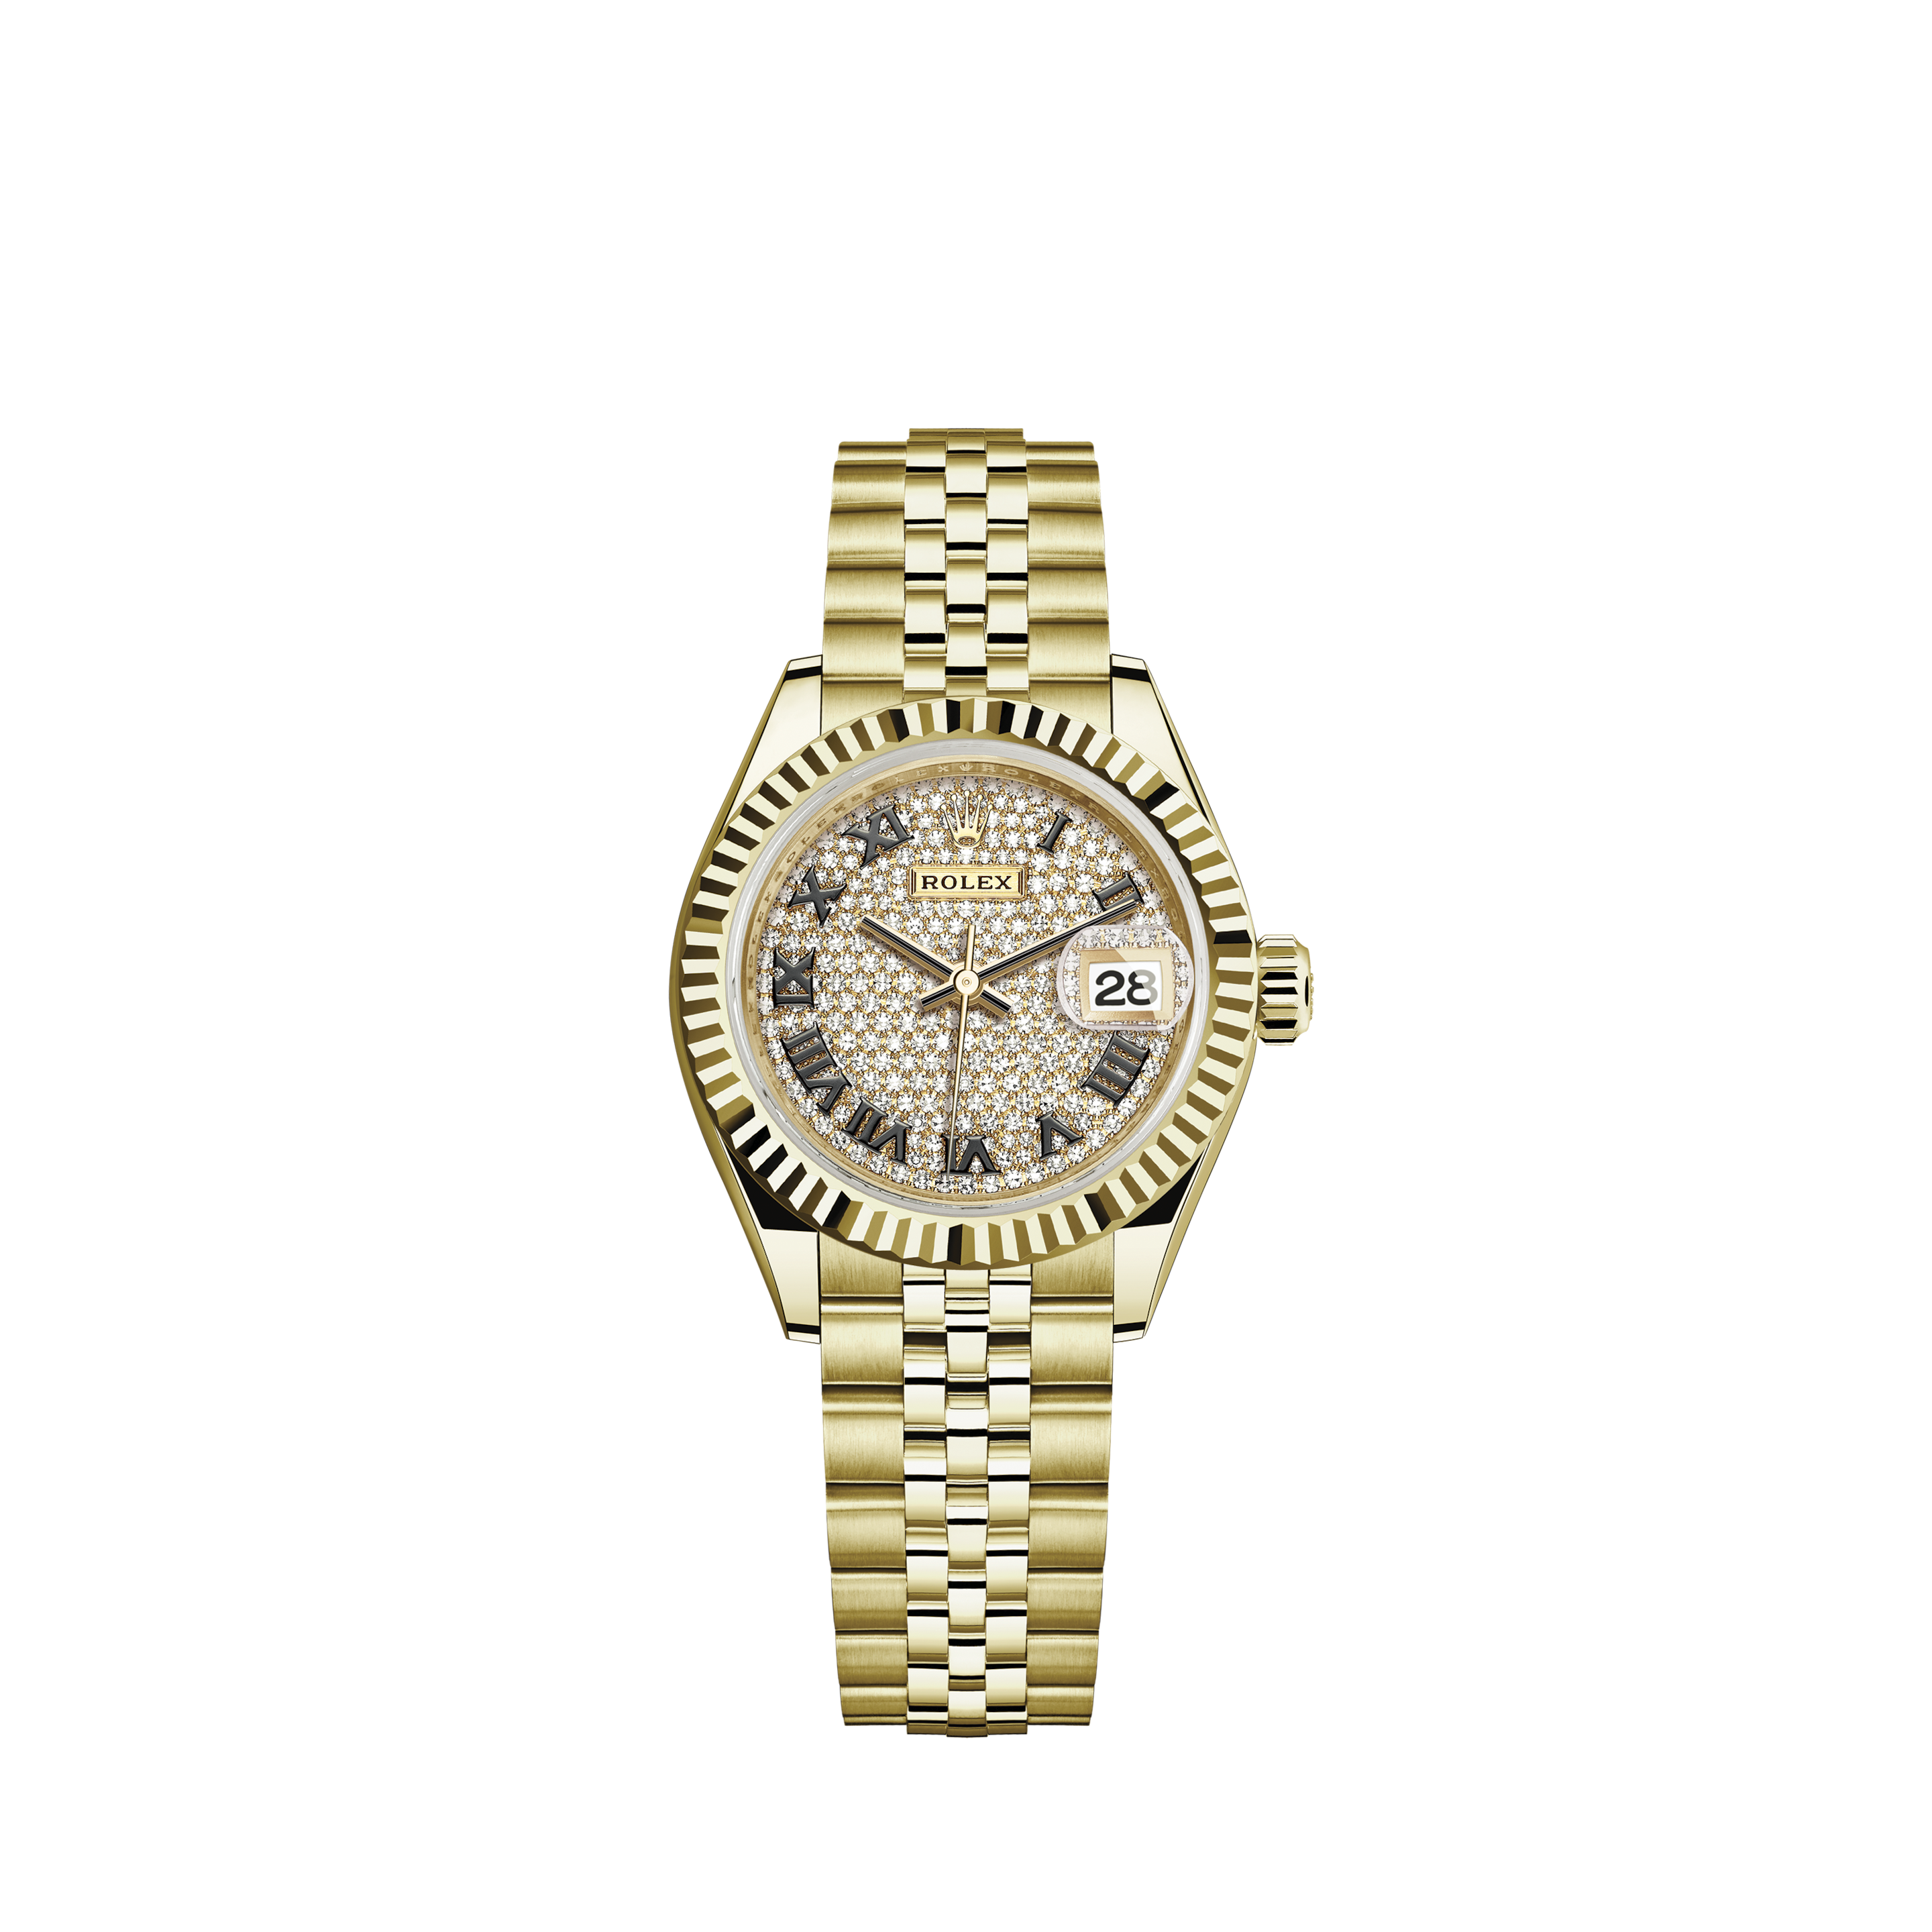 Rolex Datejust 31mm - Steel and Gold Yellow Gold - 46 Dia Bezel - Jubilee 178383 SJDJRolex Datejust 31mm - Steel and Gold Yellow Gold - 46 Dia Bezel - Jubilee 178383 WRJ